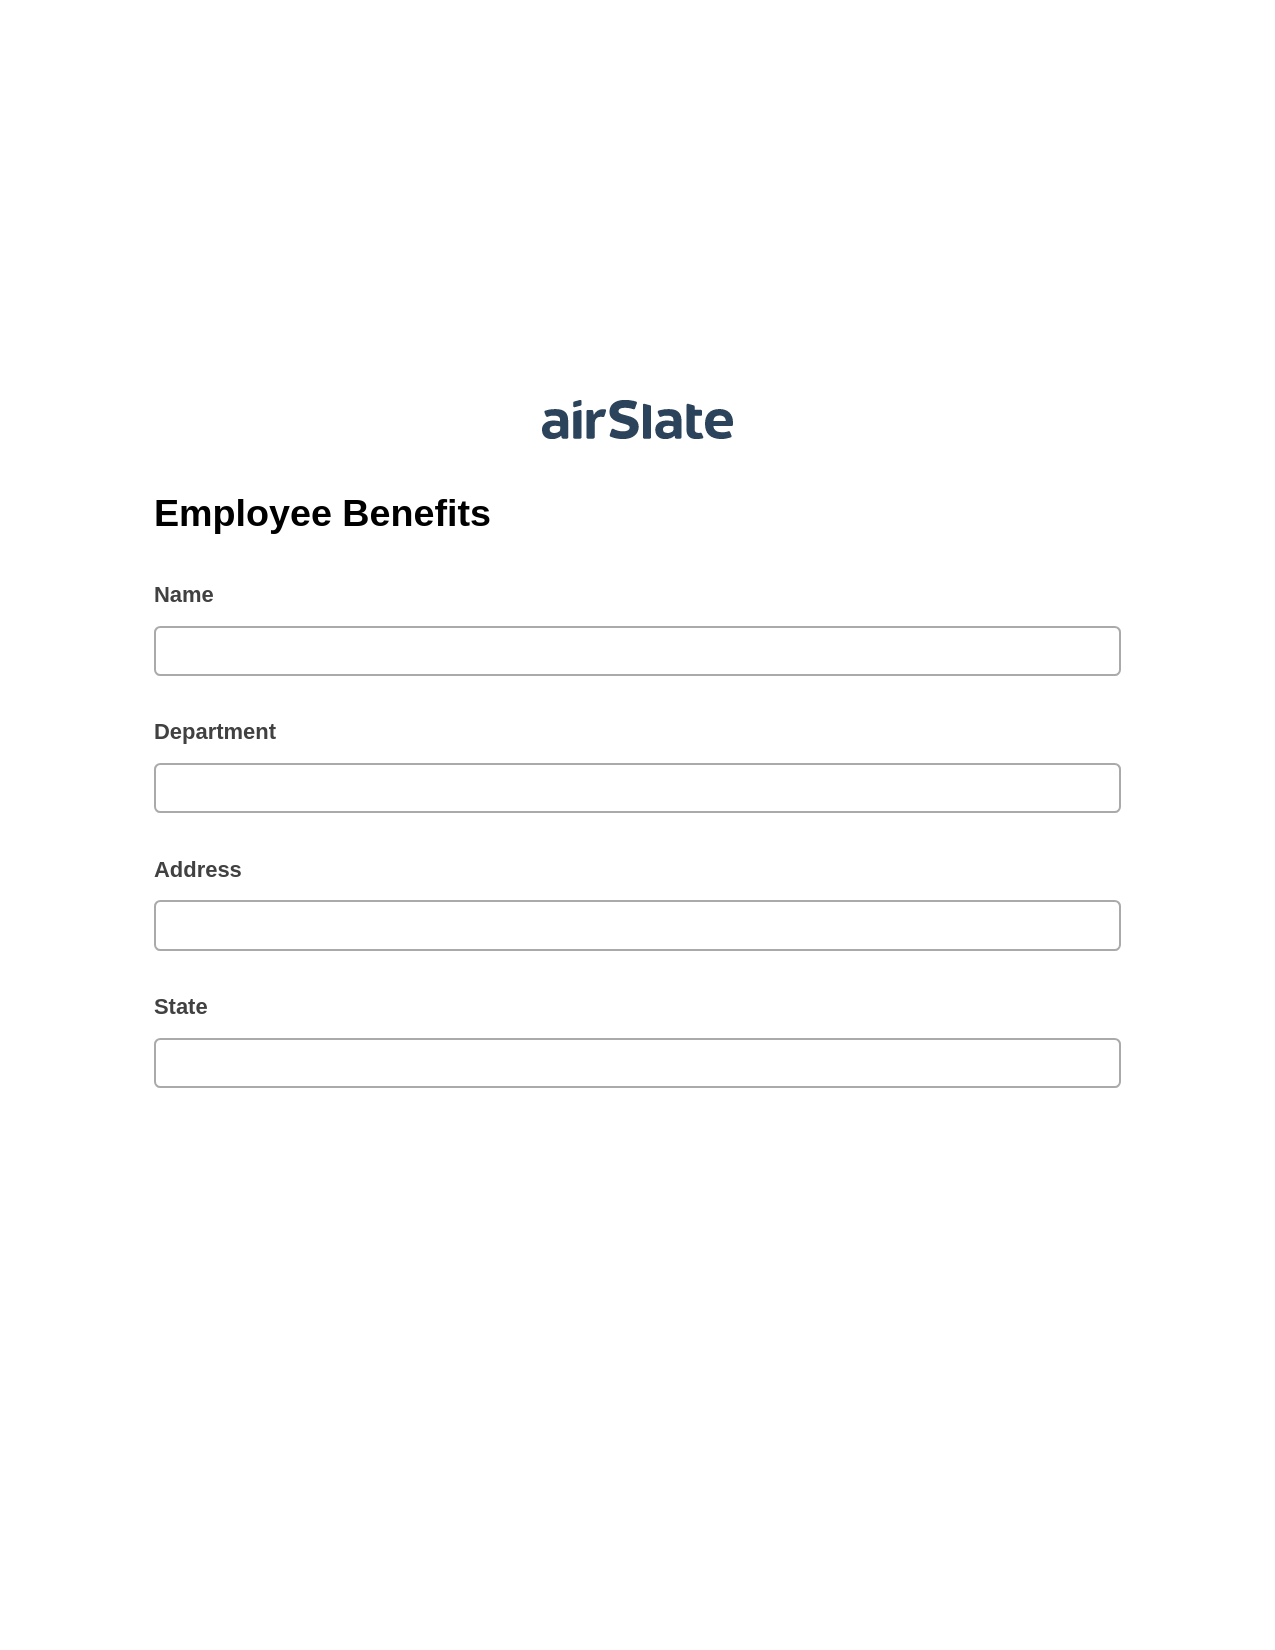 Employee Benefits Pre-fill from another Slate Bot, Create slate addon, Dropbox Bot